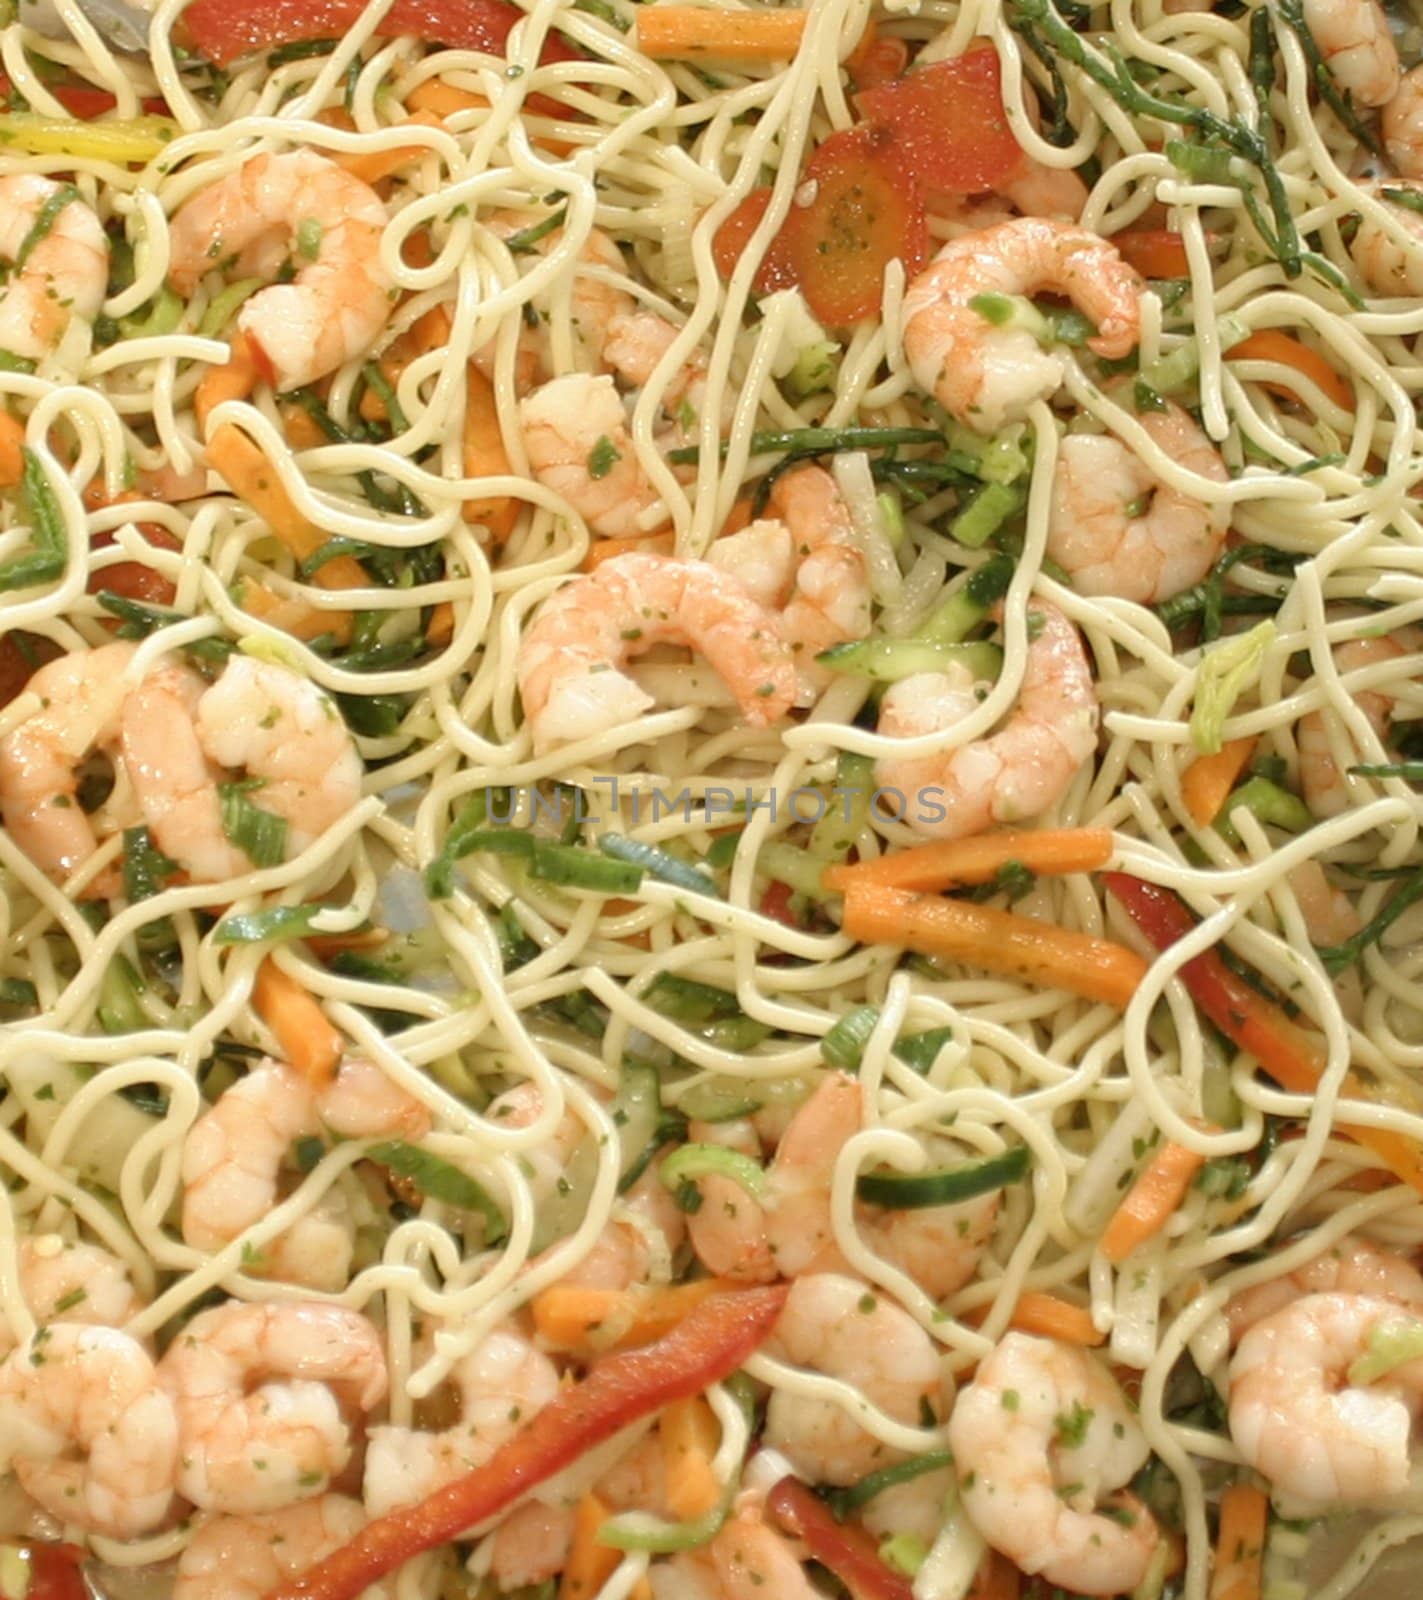 Spaghetti with shrimps and vegetables for a supper by AlexandrePavlov